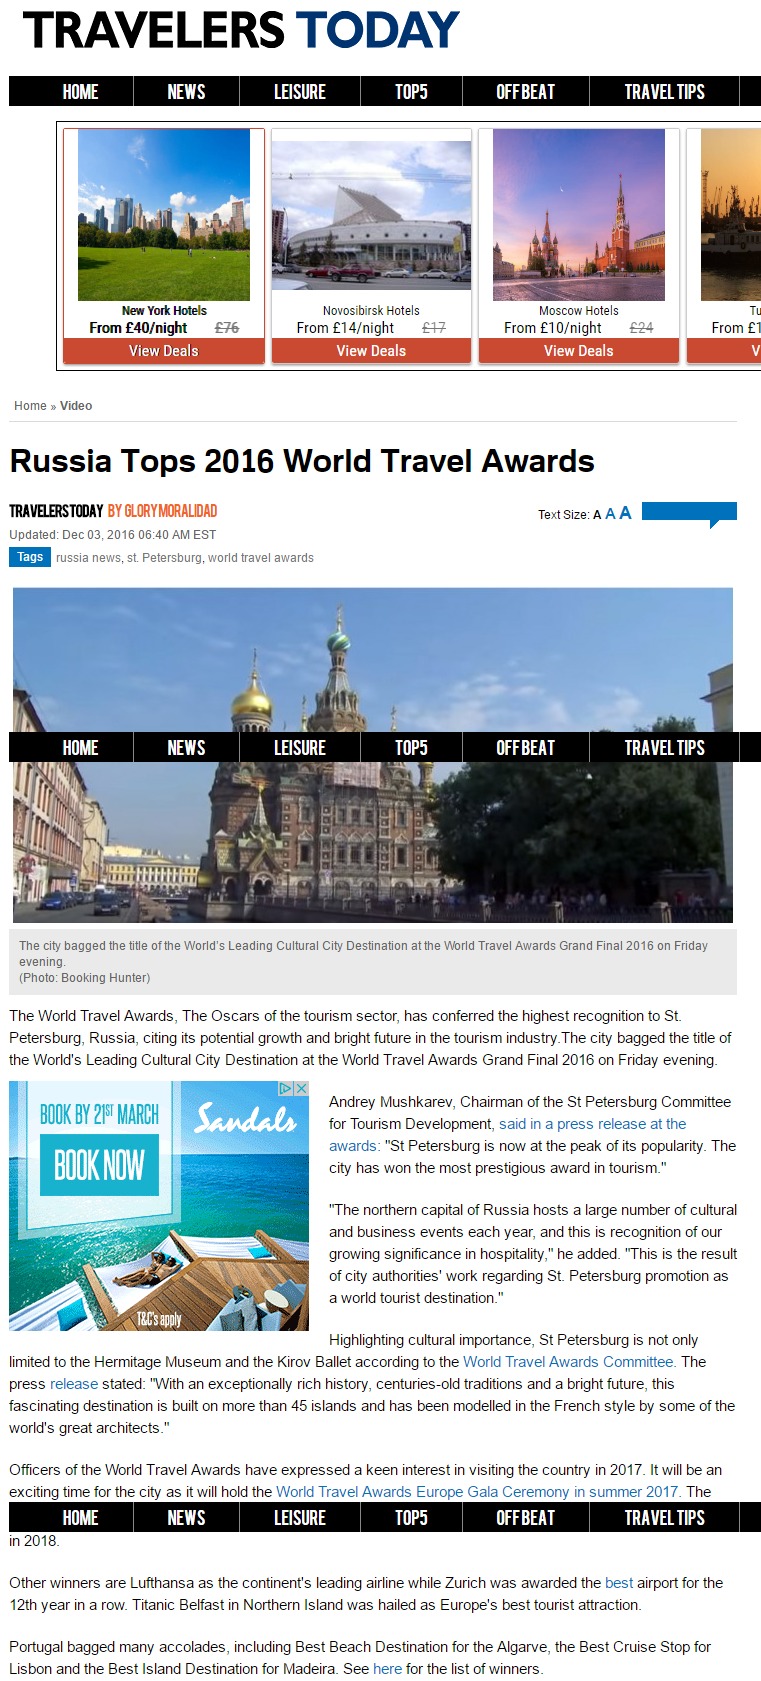 Russia Tops 2016 World Travel Awards